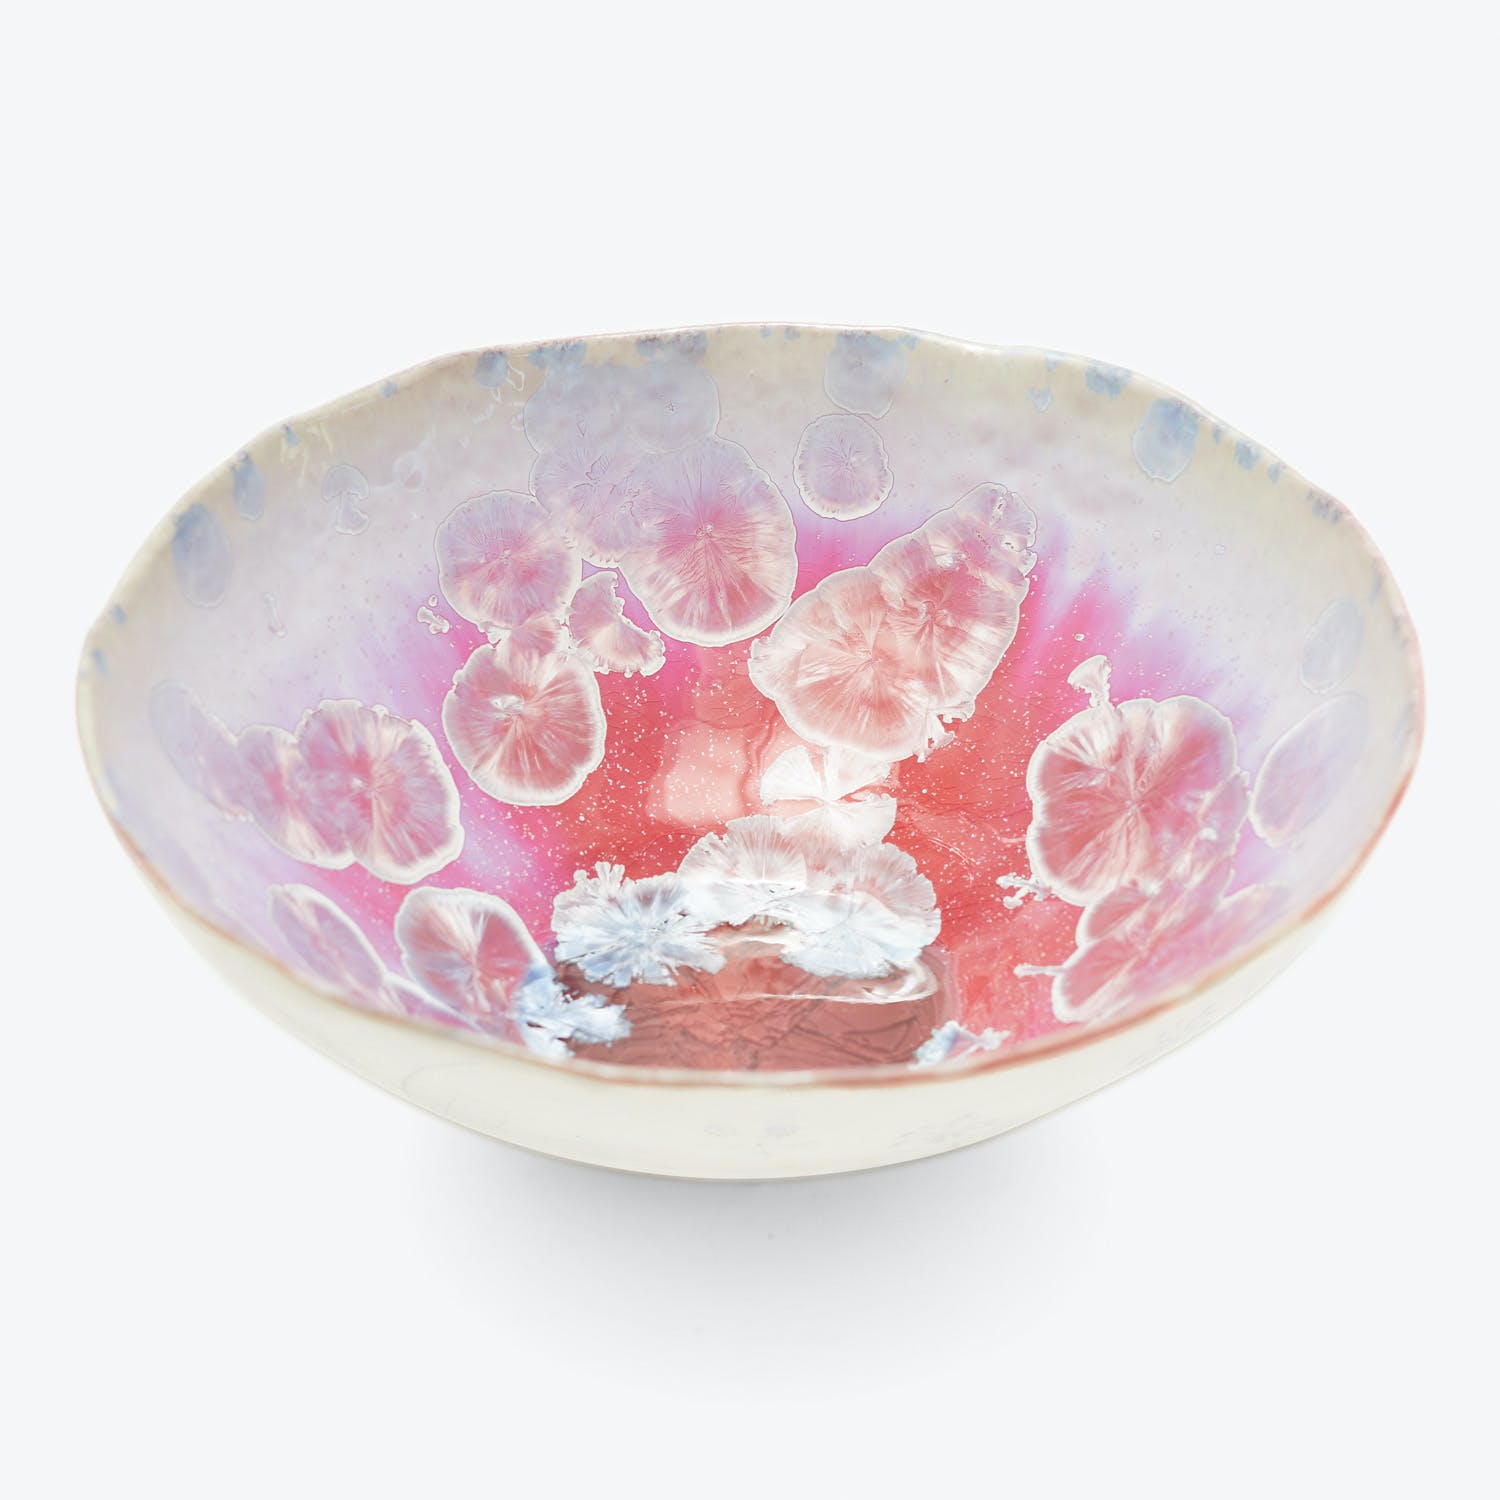 Exquisite floral patterned bowl with translucent flowers in shades of pink, white, and blue.